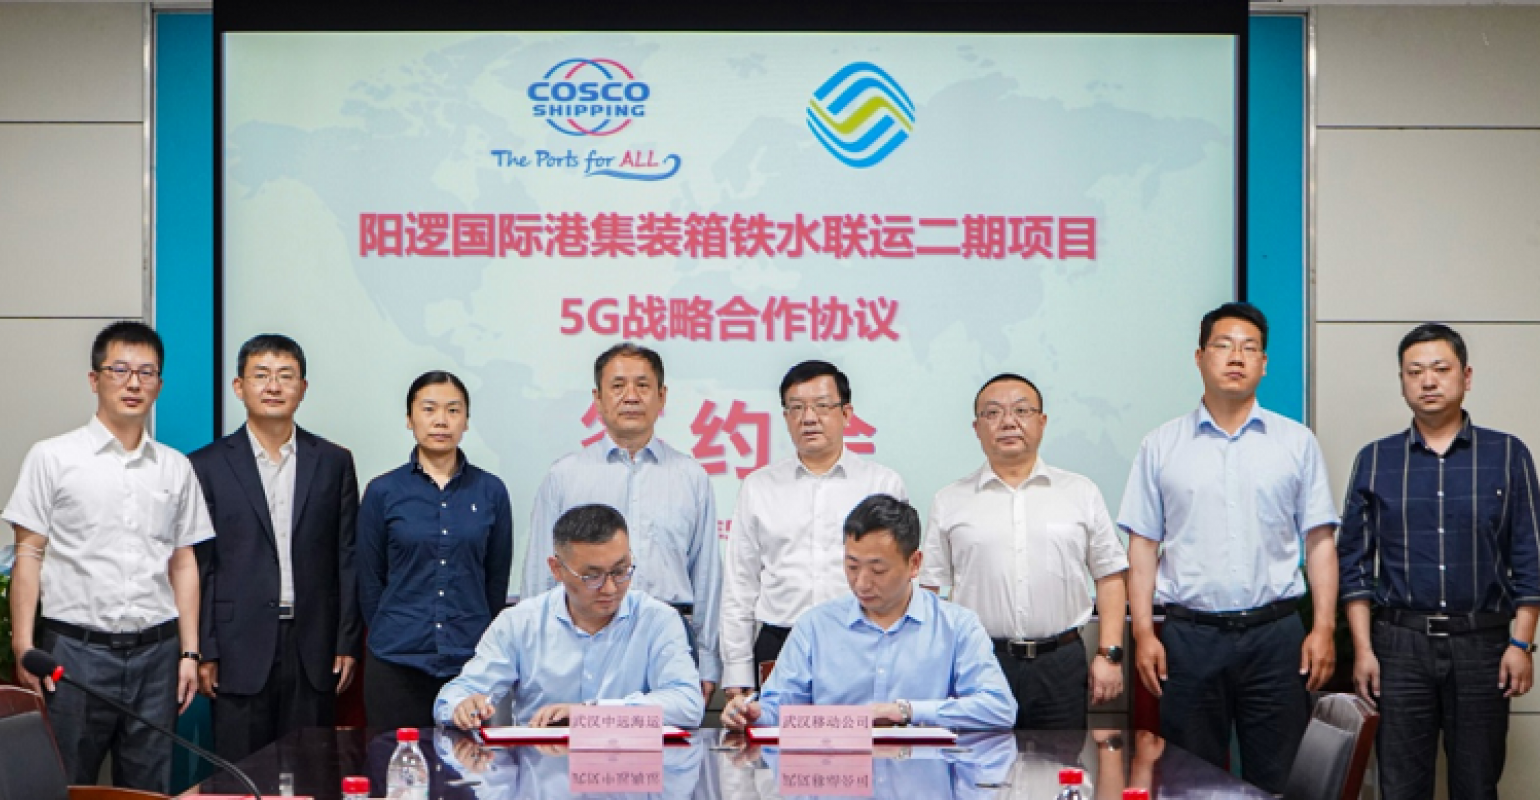 Cosco Shipping and China Mobile ink 5G agreement for Wuhan’s Yangluo port